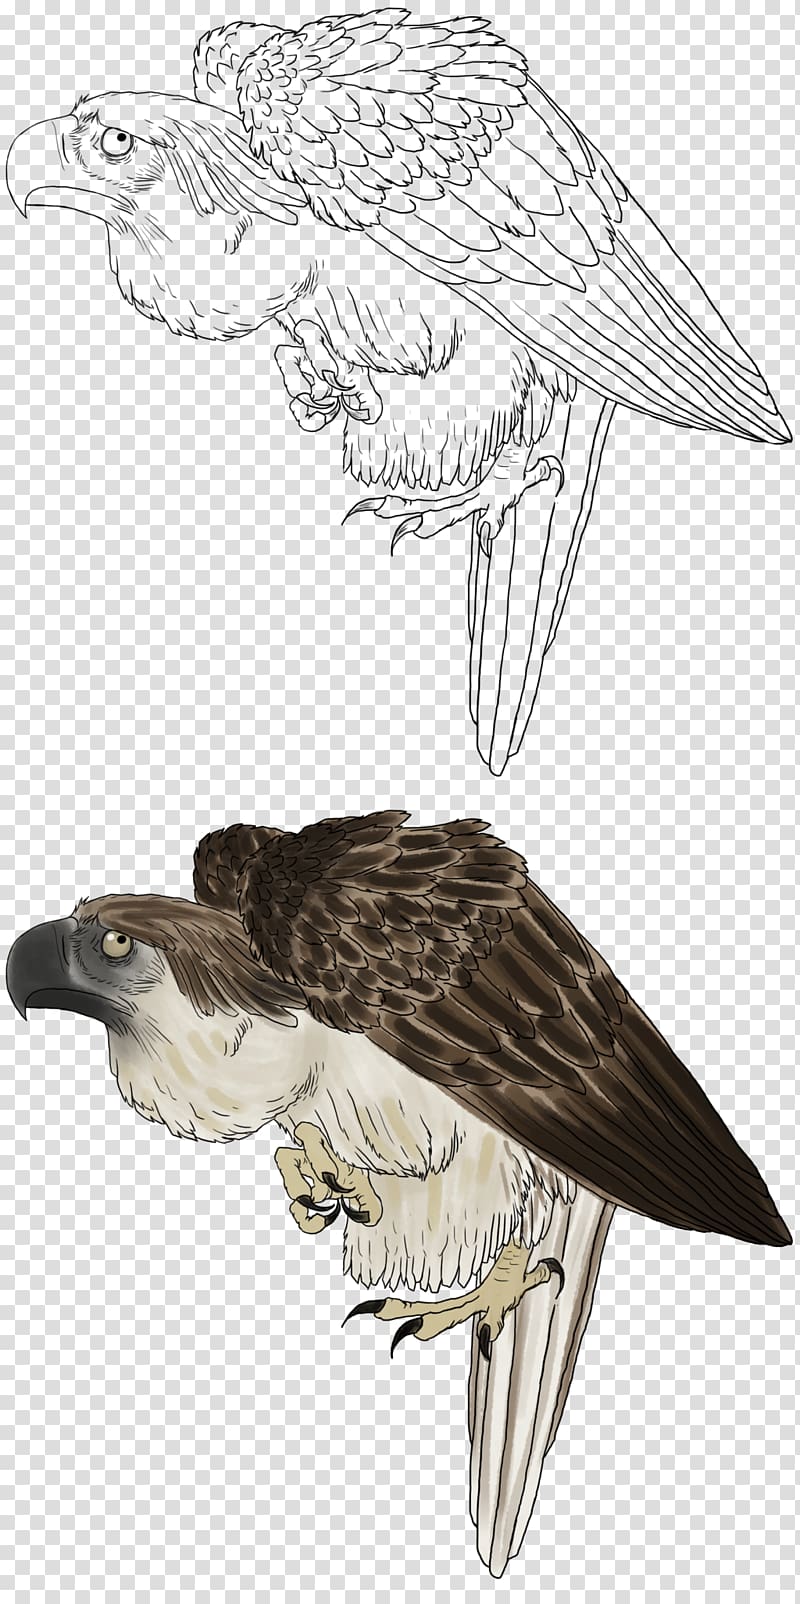 Bald Eagle Philippines Hawk Philippine Eagle White-tailed Eagle, enlarged drawing transparent background PNG clipart